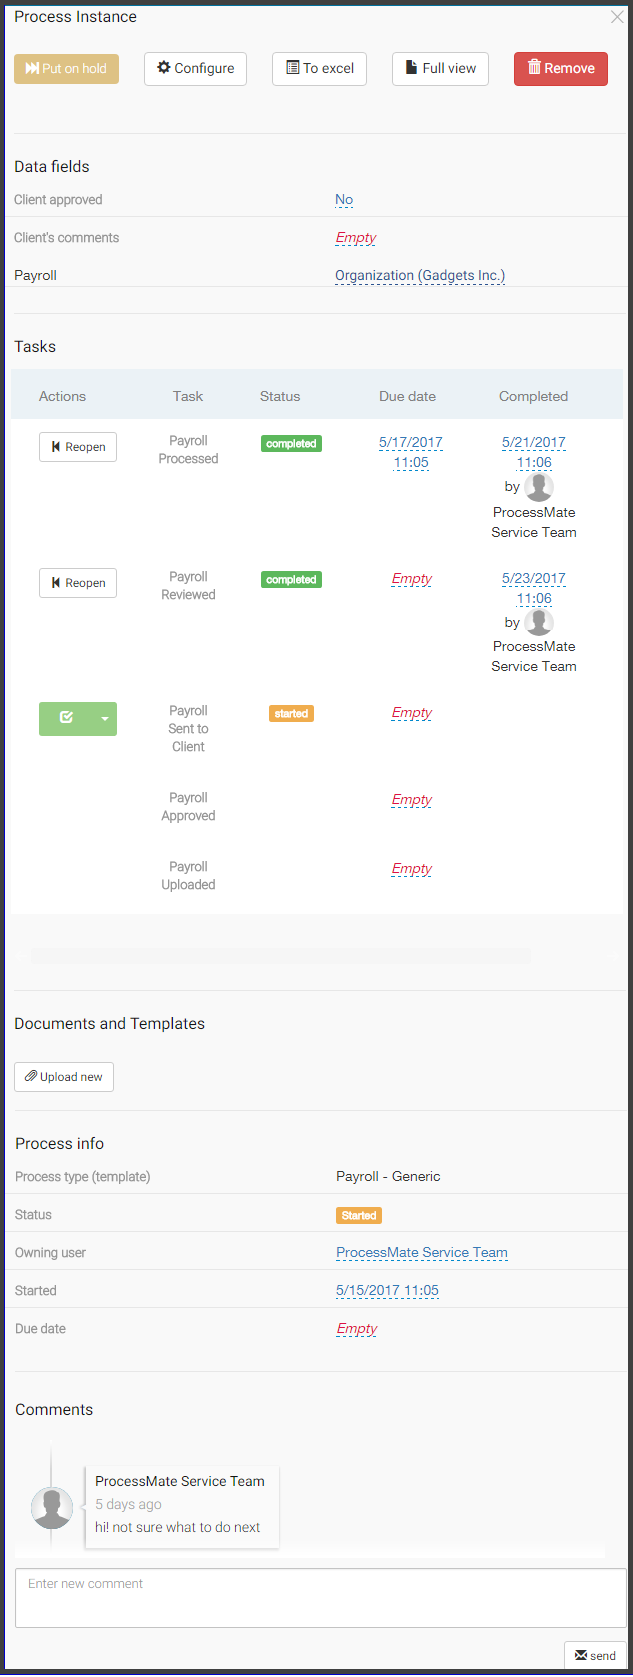 Screenshot: process instance of Payroll worfklow with tasks and data fields